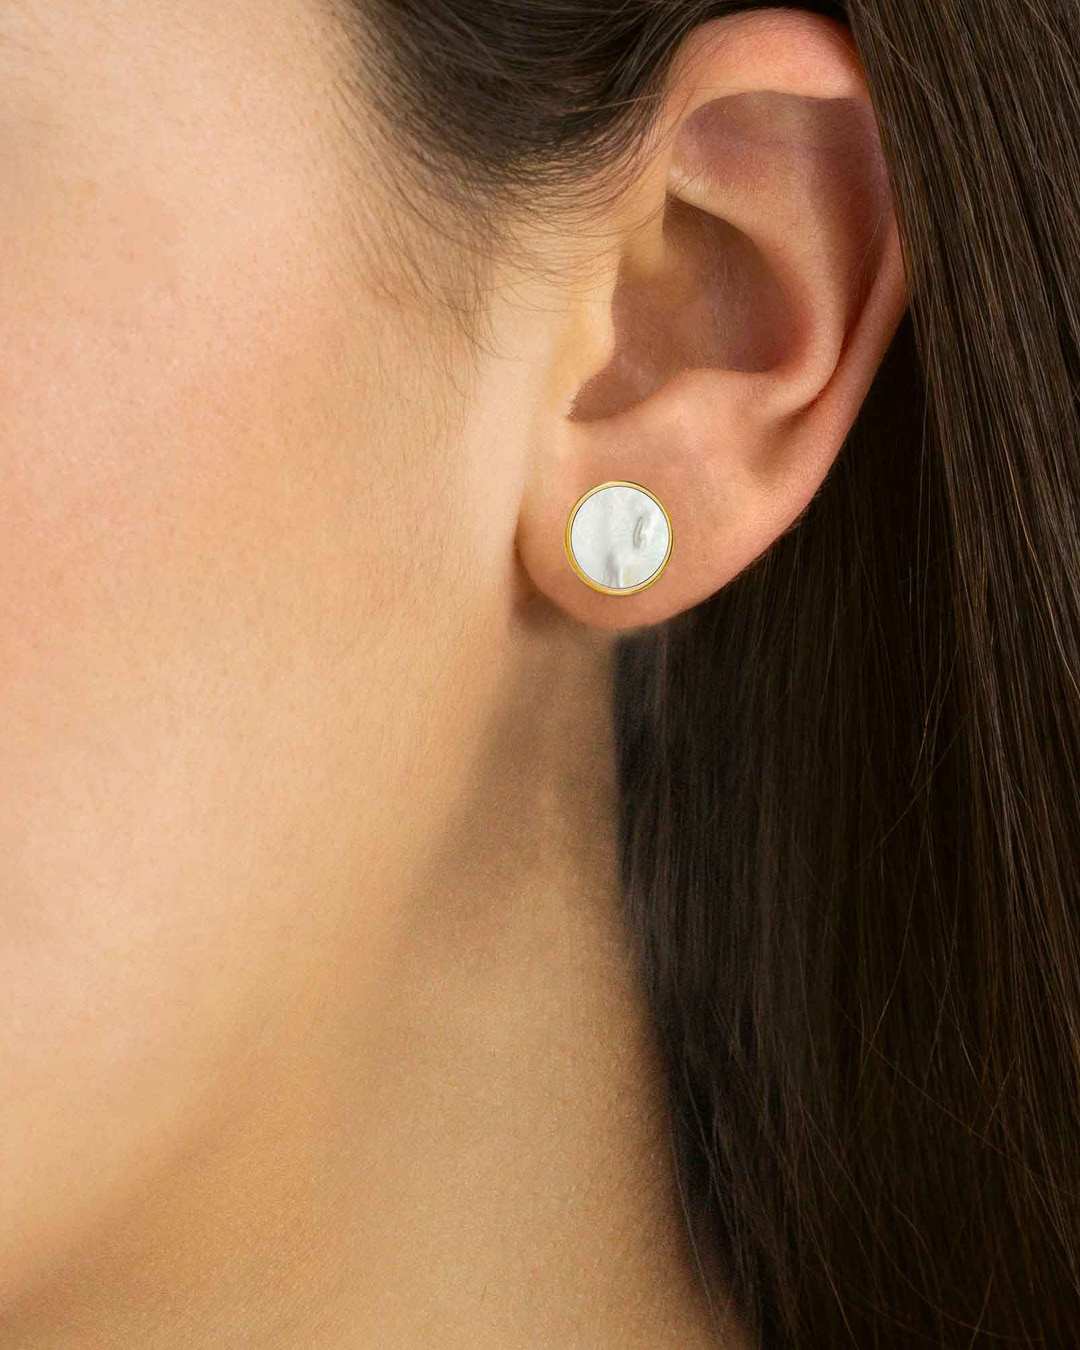 Protection Stone Mother Pearl Signature Stud Earrings, Gold